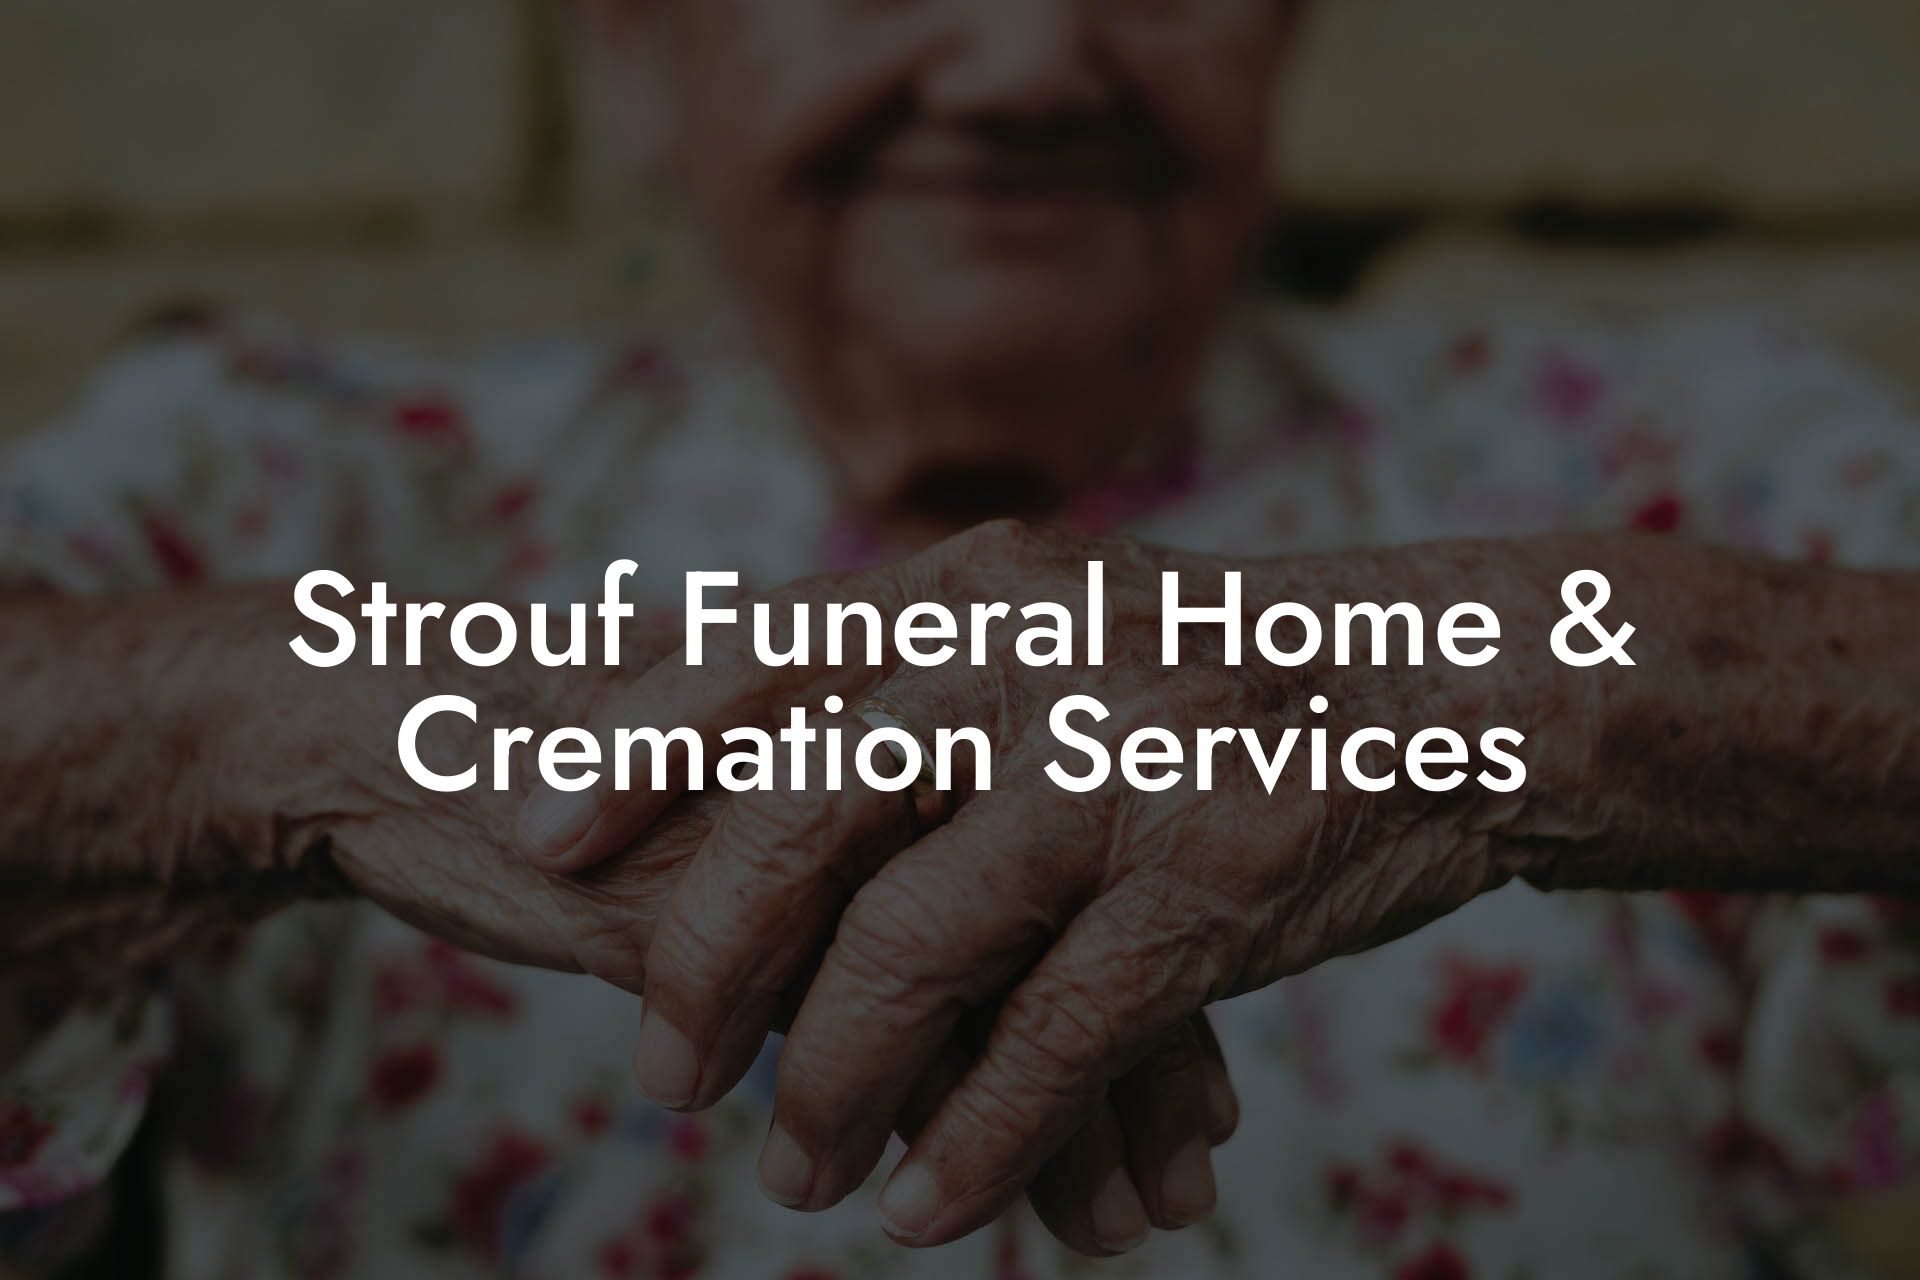 Strouf Funeral Home & Cremation Services